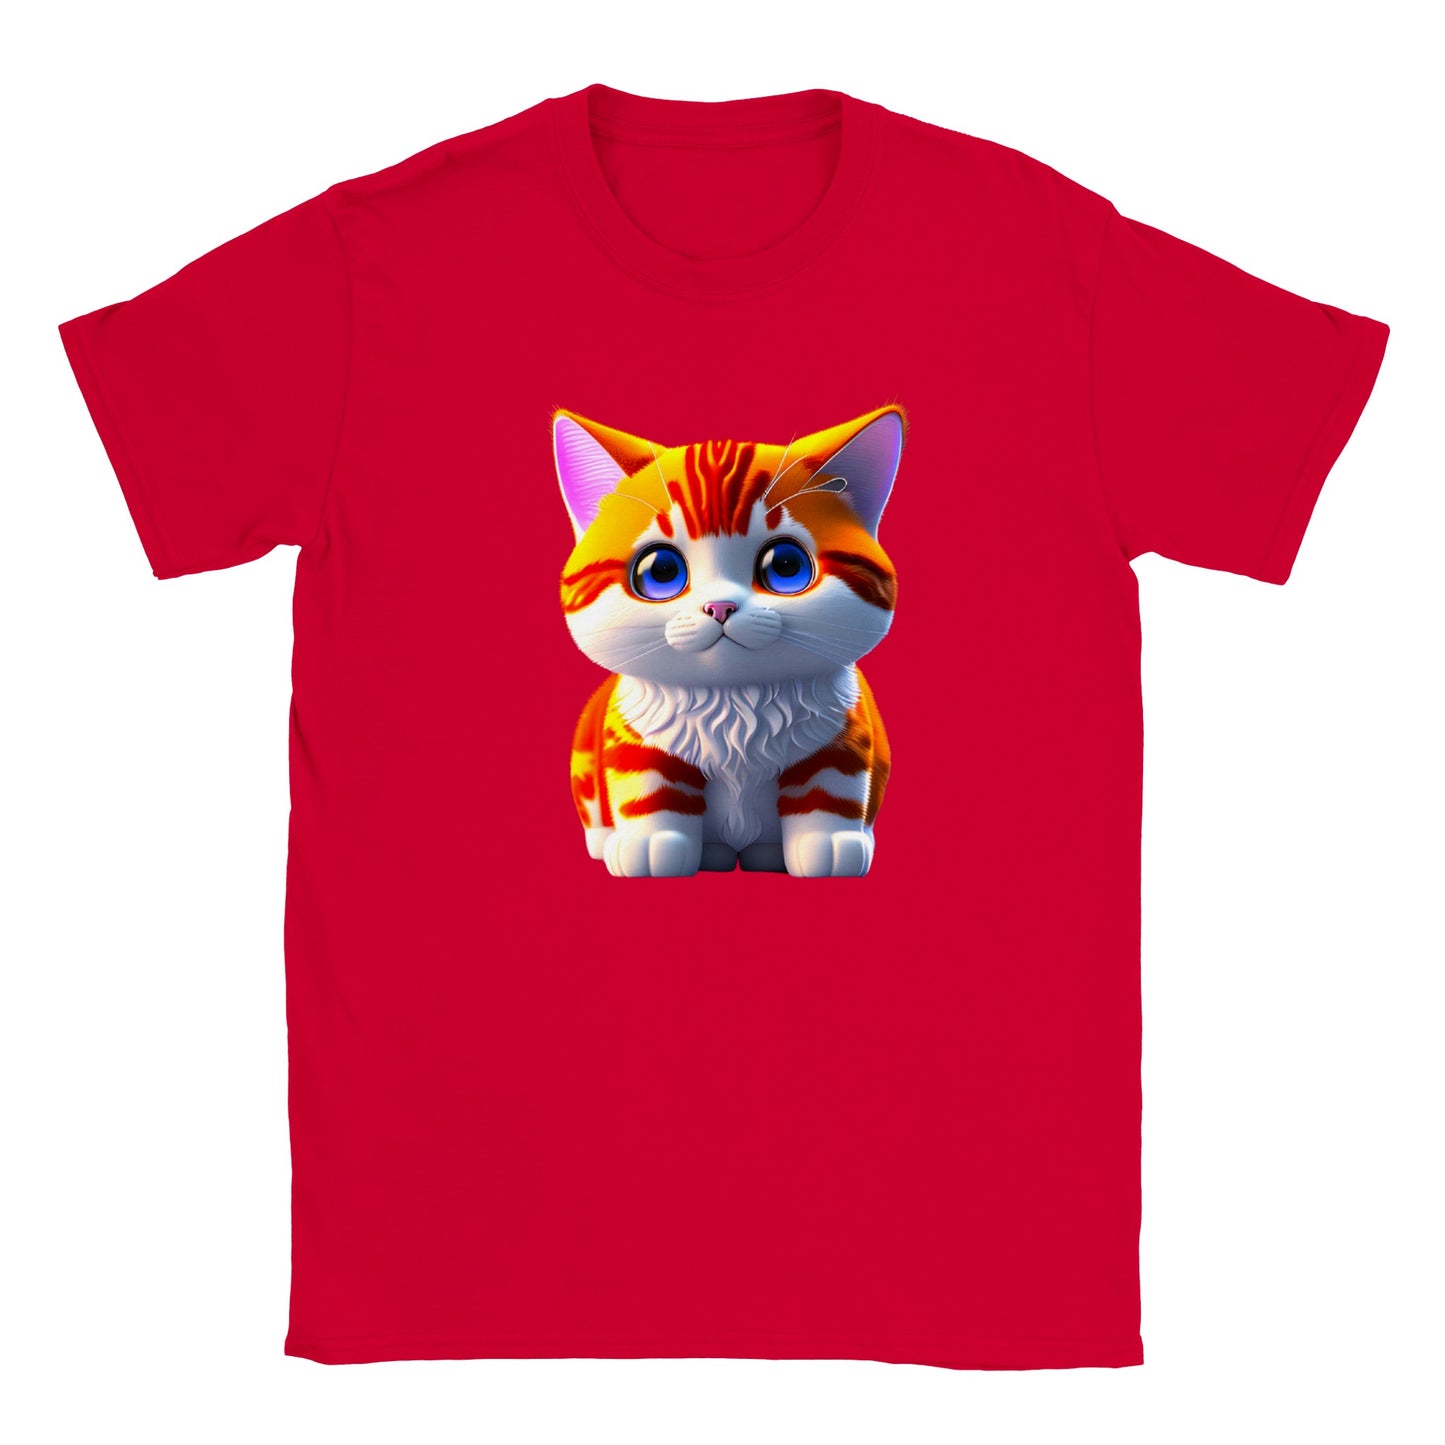 Adorable, Cool, Cute Cats and Kittens Toy - Classic Kids Crewneck T-Shirt 31